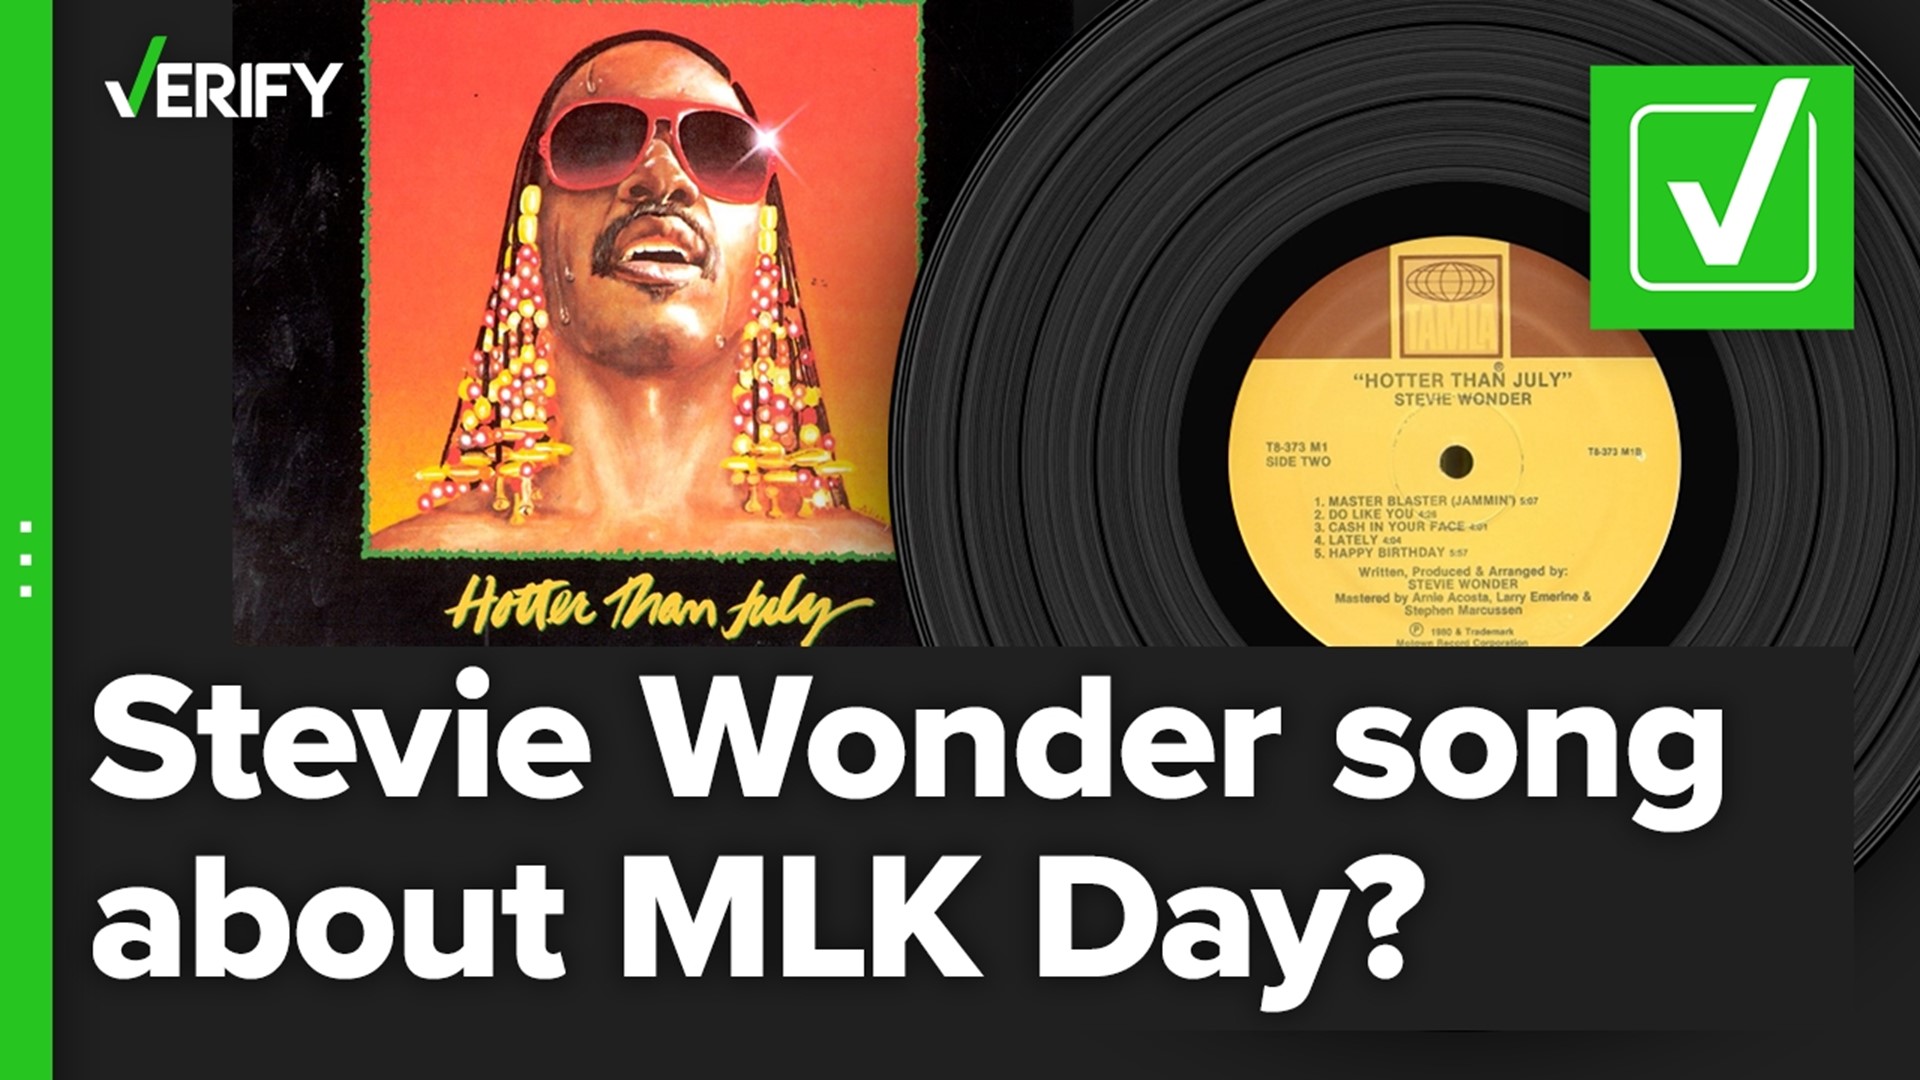 The song was released on Wonder's 1980 album '"Hotter than July." He regularly sang it in rallies for the national holiday.